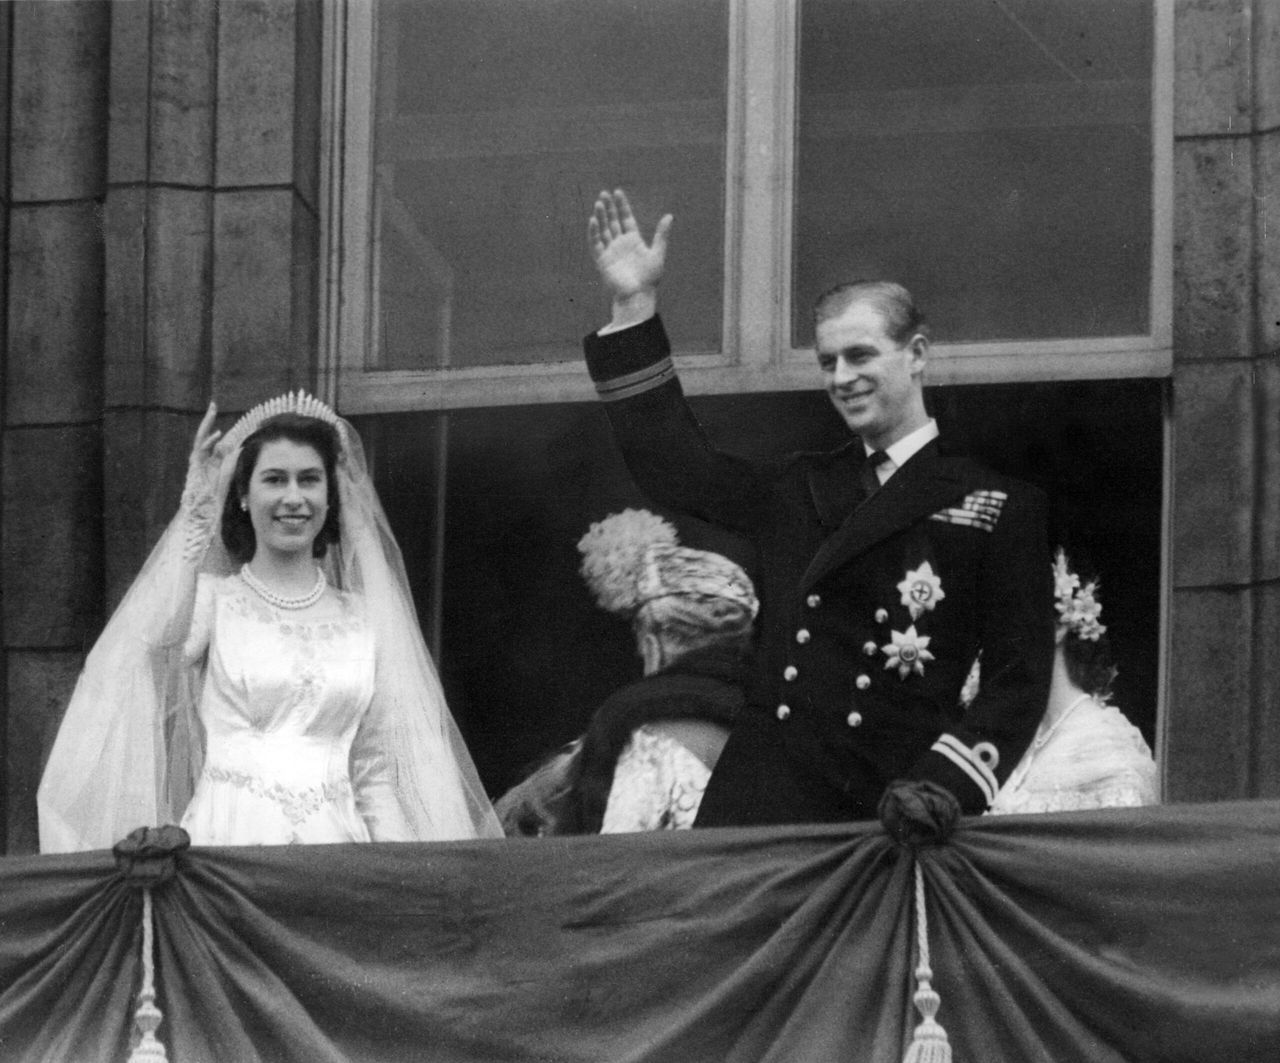 Royal Wedding of Princess Elizabeth (Queen Elizabeth II) and Prince Philip (Duke of Edinburgh) At Westminster Abbey on 20th November 1947. Picture shows the couple on the balcony at Buckingham Palace waving at the crowds.
©Northcliffe Collection/Solo Syndication